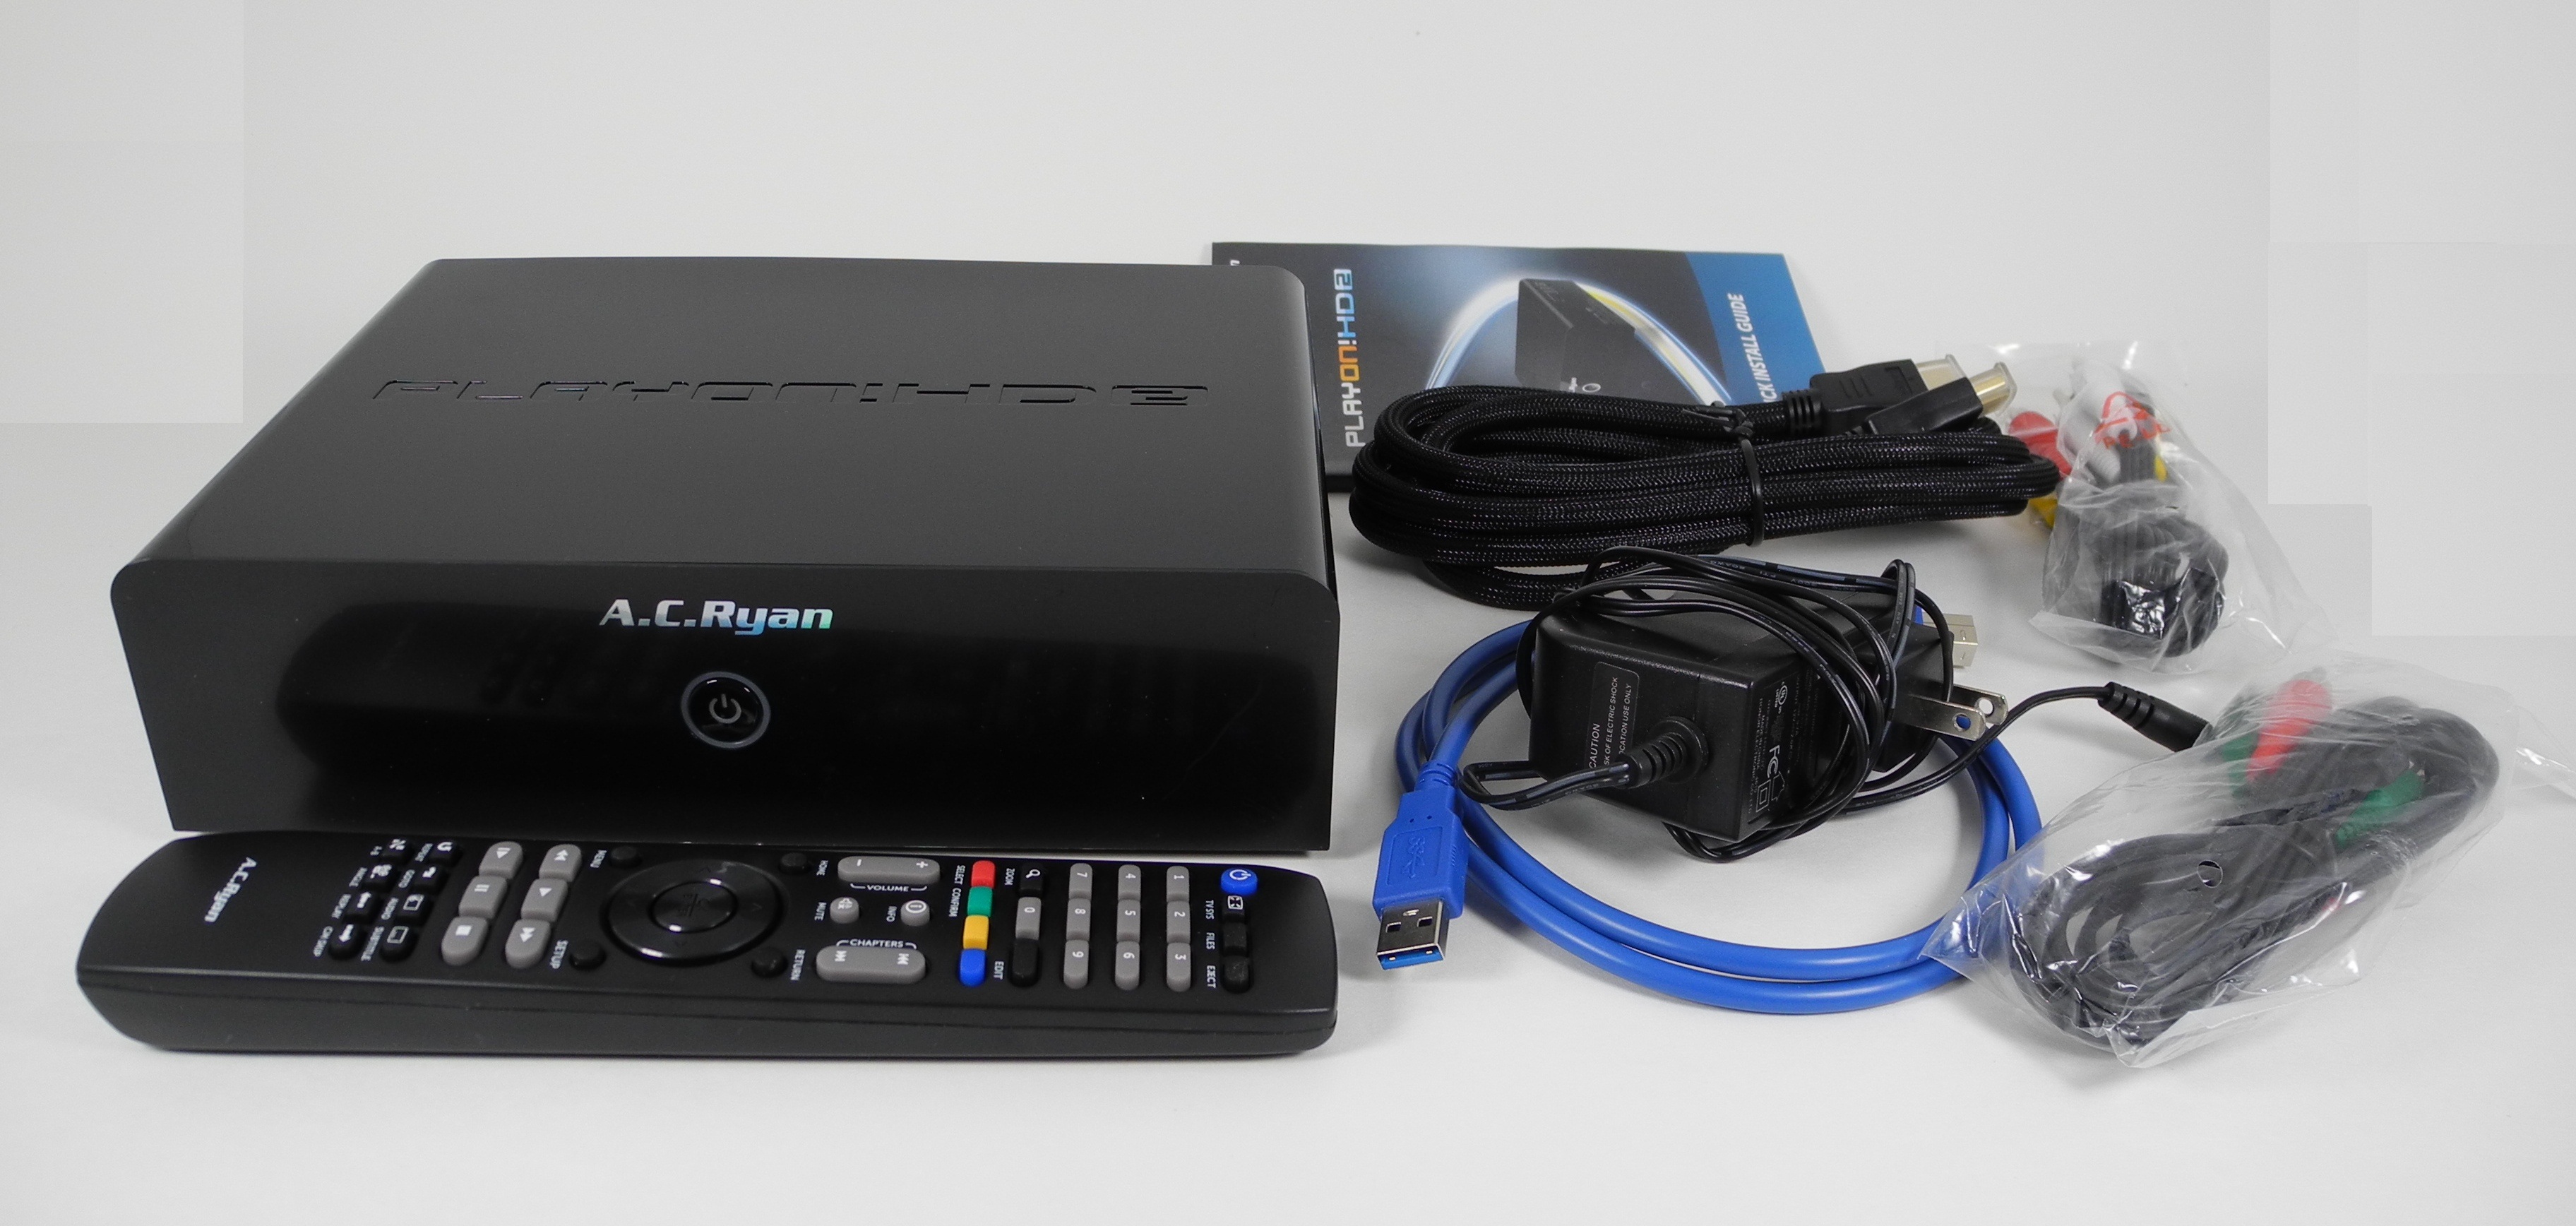 mandat Precipice Opdage Unboxing the PlayOn!HD2 - A.C.Ryan PlayOn!HD2 - First Realtek 1185 Media  Streamer in the Wild!